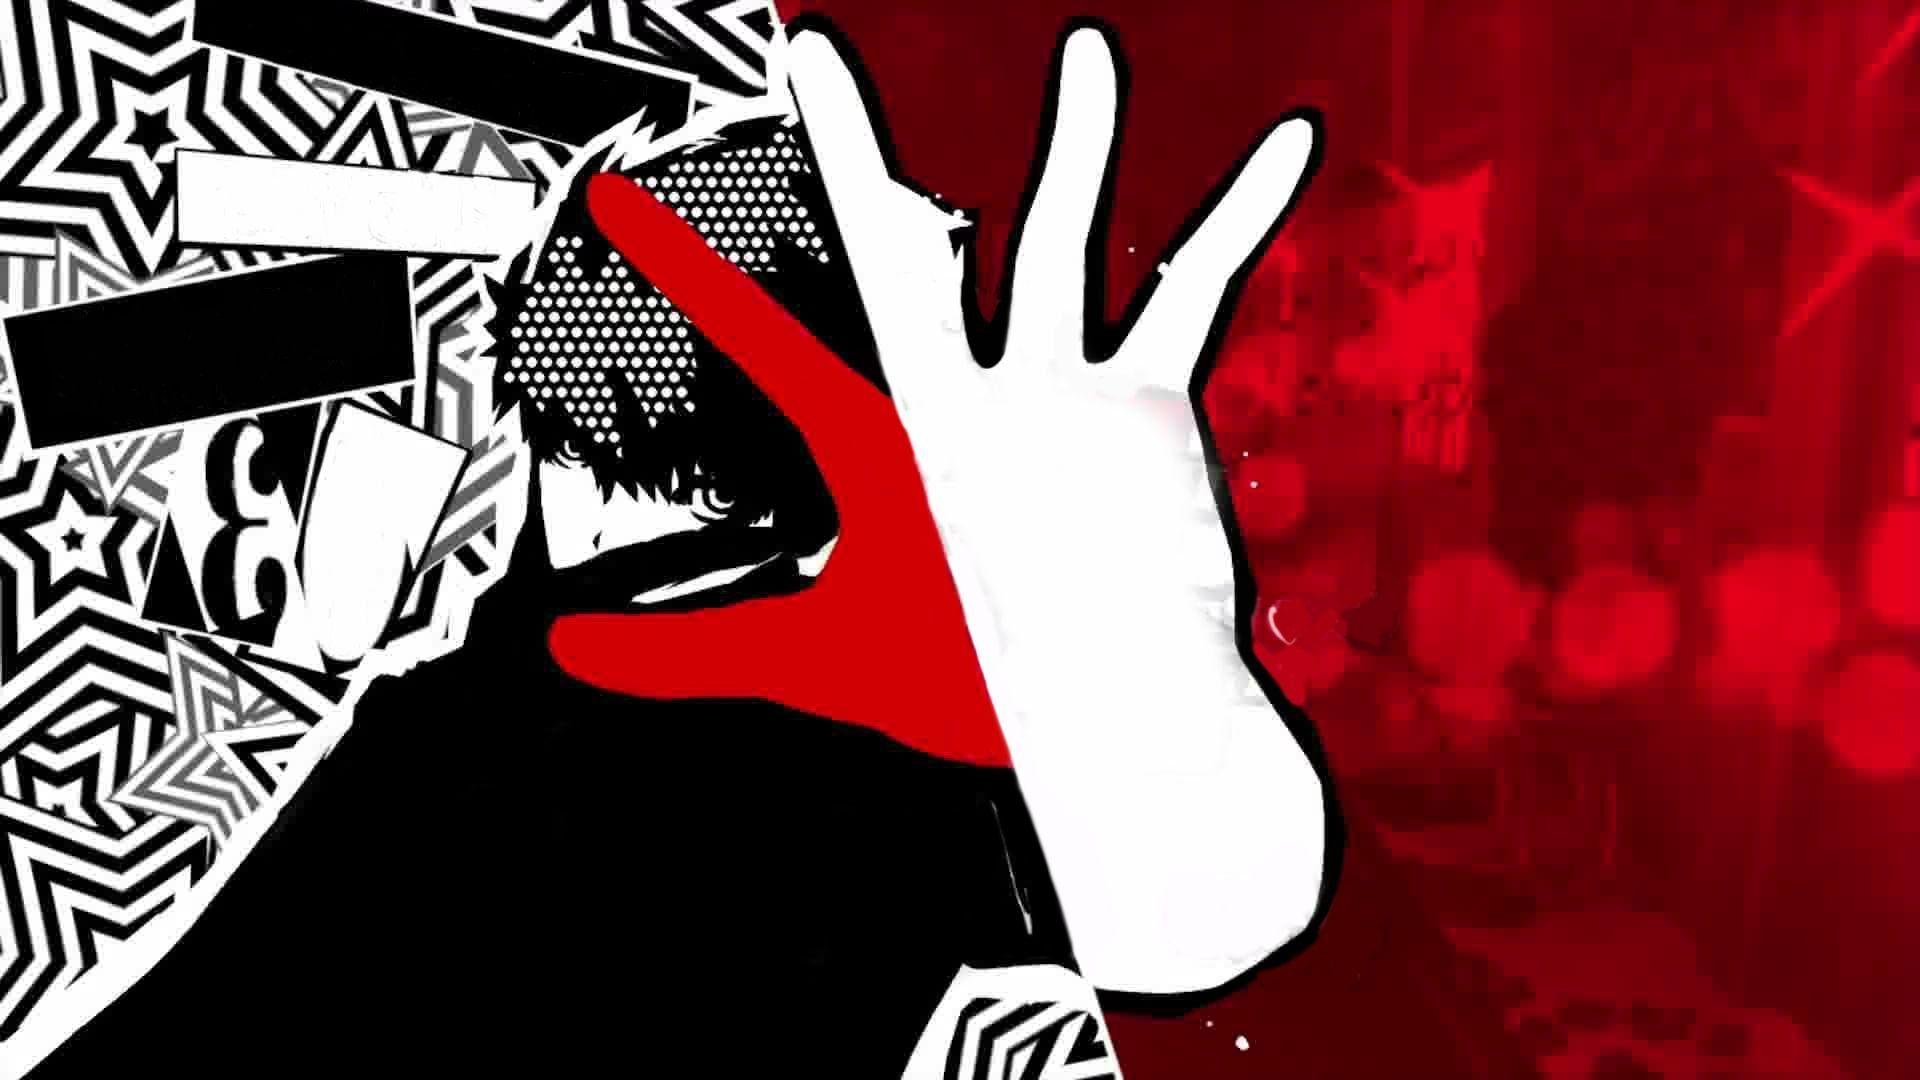 Persona 5 wallpaper HD High Quality Download